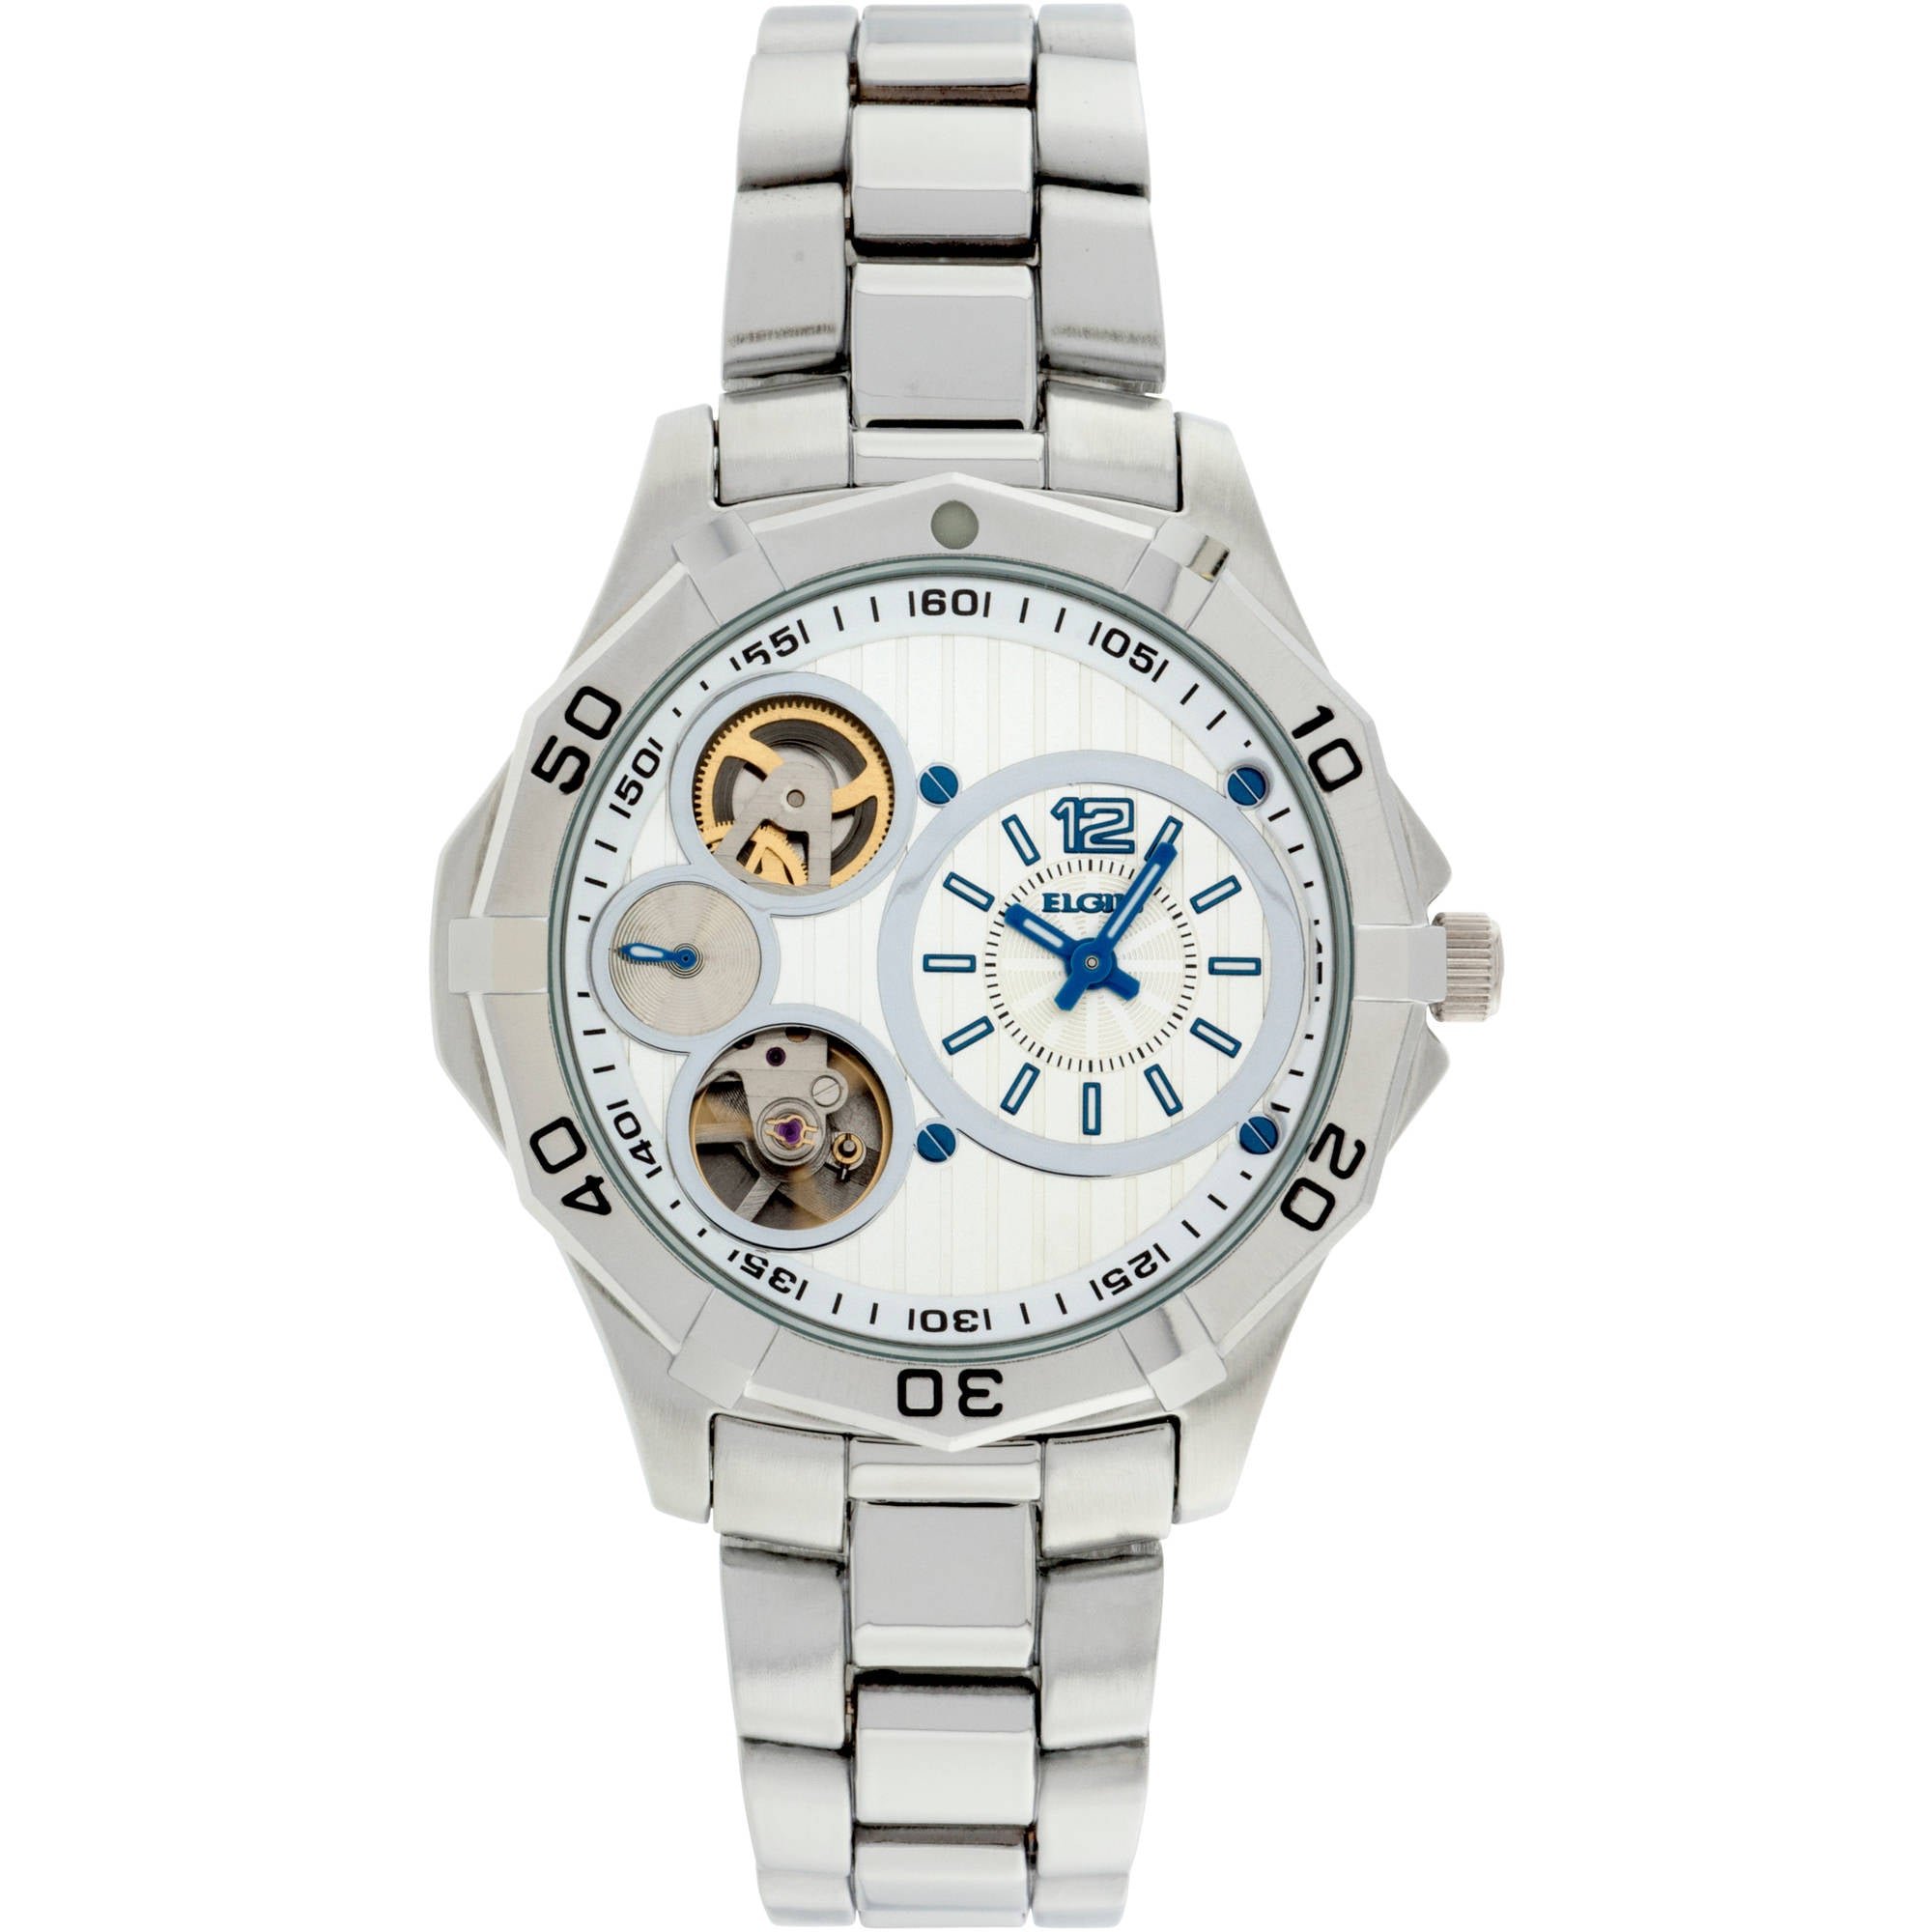 Model: Men's Elgin Semi Automatic Bracelet Watch with Silver Tone Round Case and White and Silver Dial